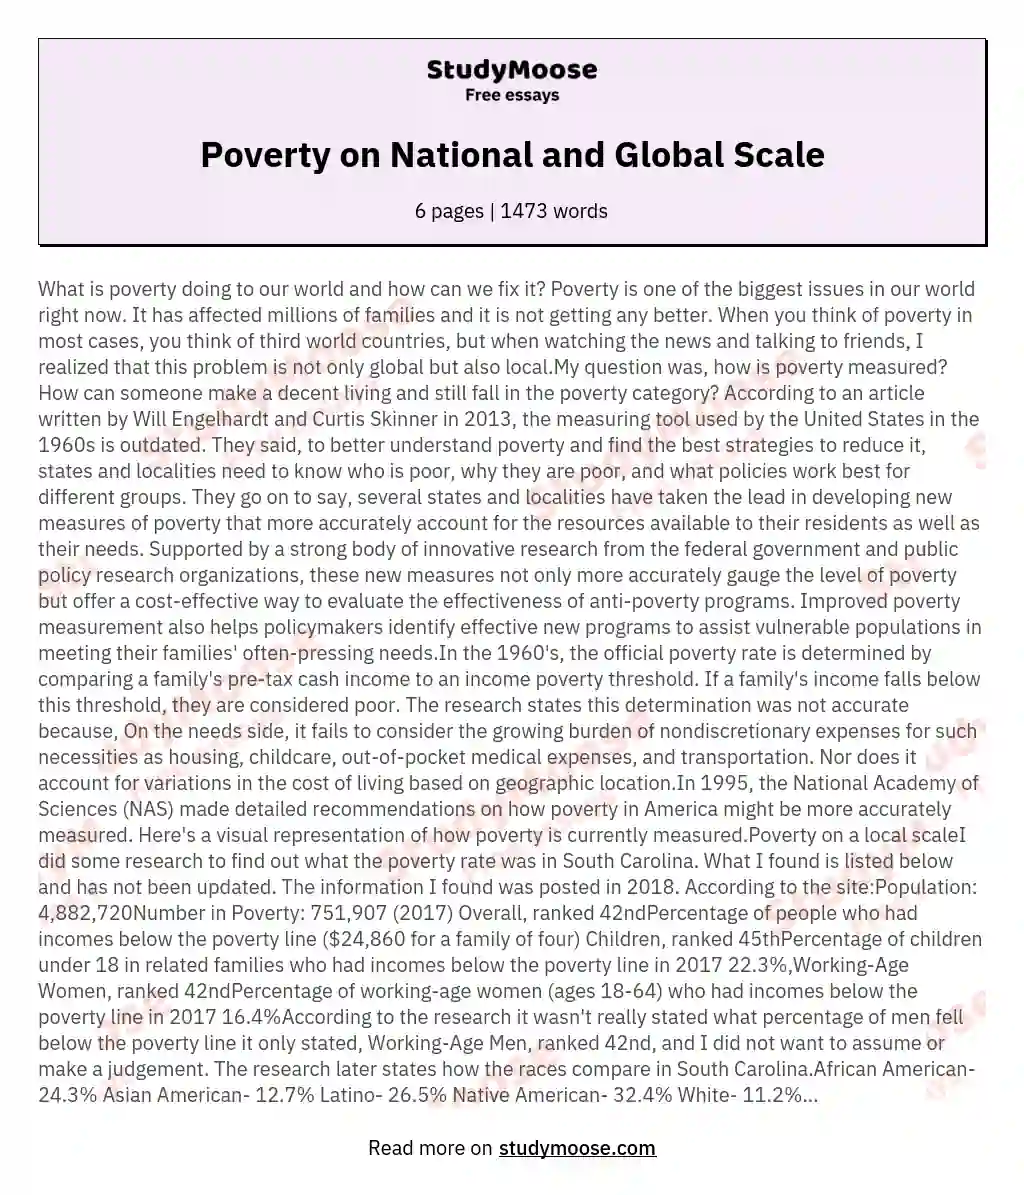 Poverty on National and Global Scale essay